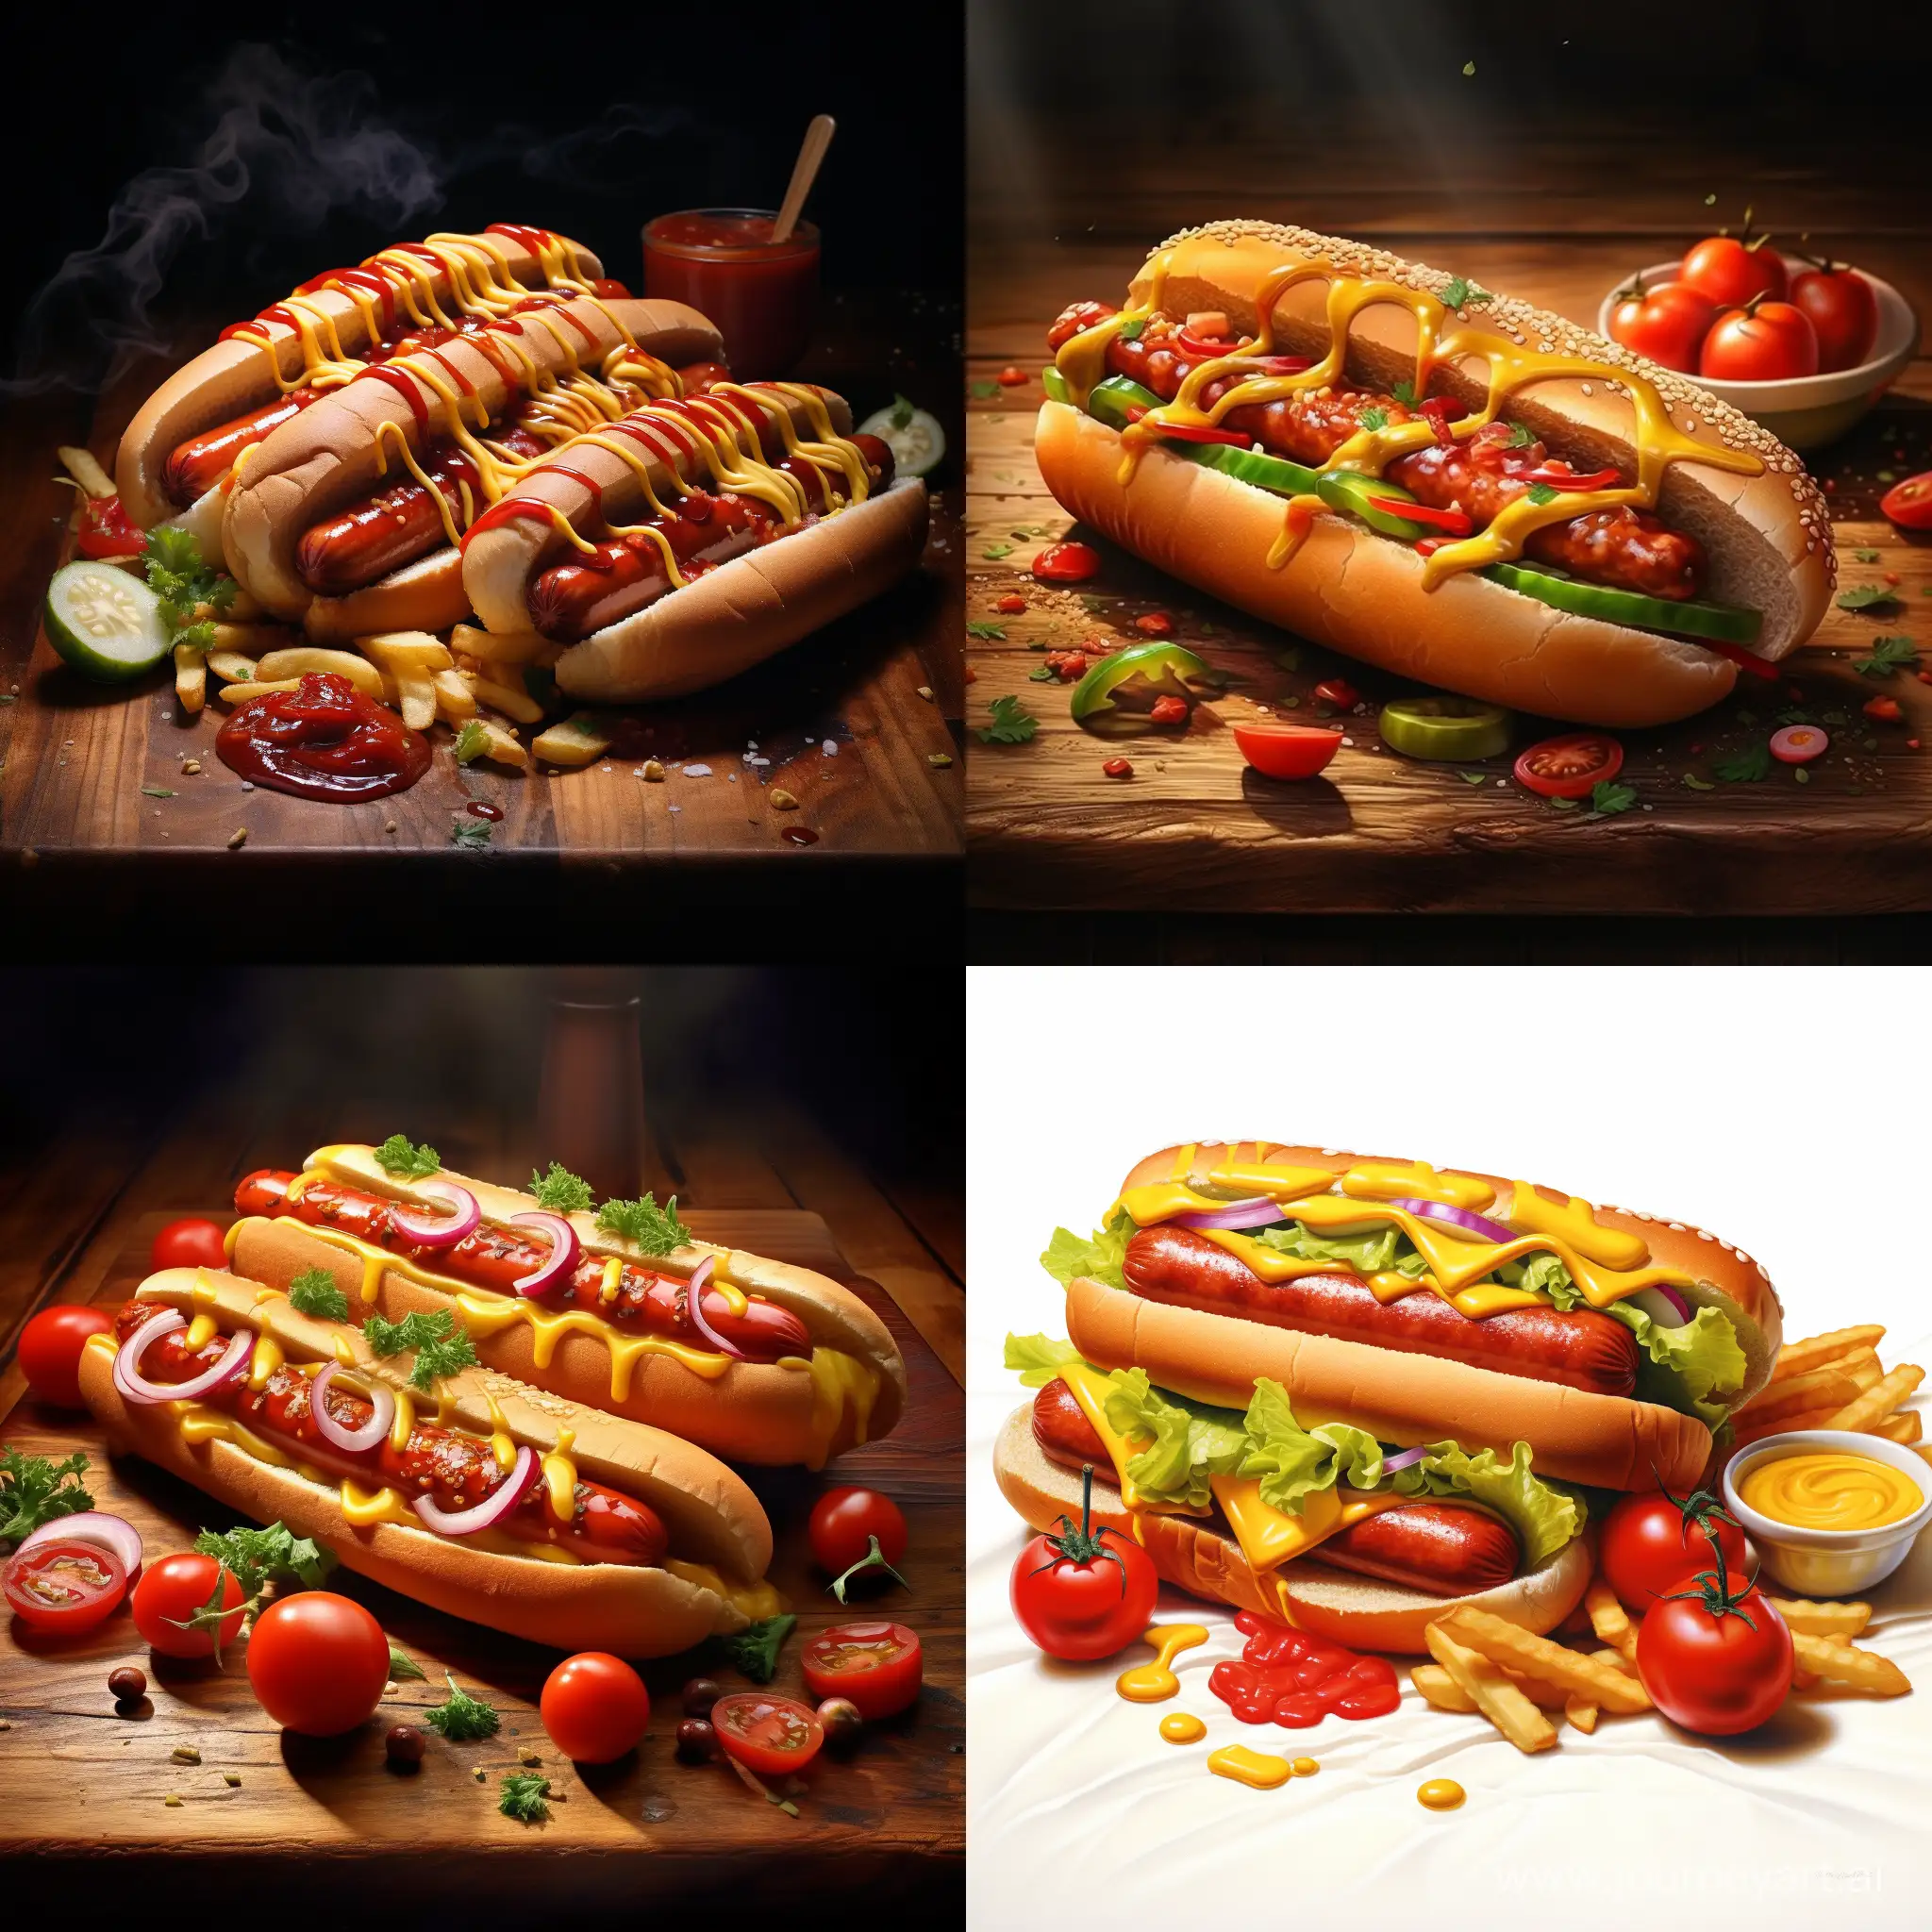 Delicious-and-Realistic-Hotdogs-Photography